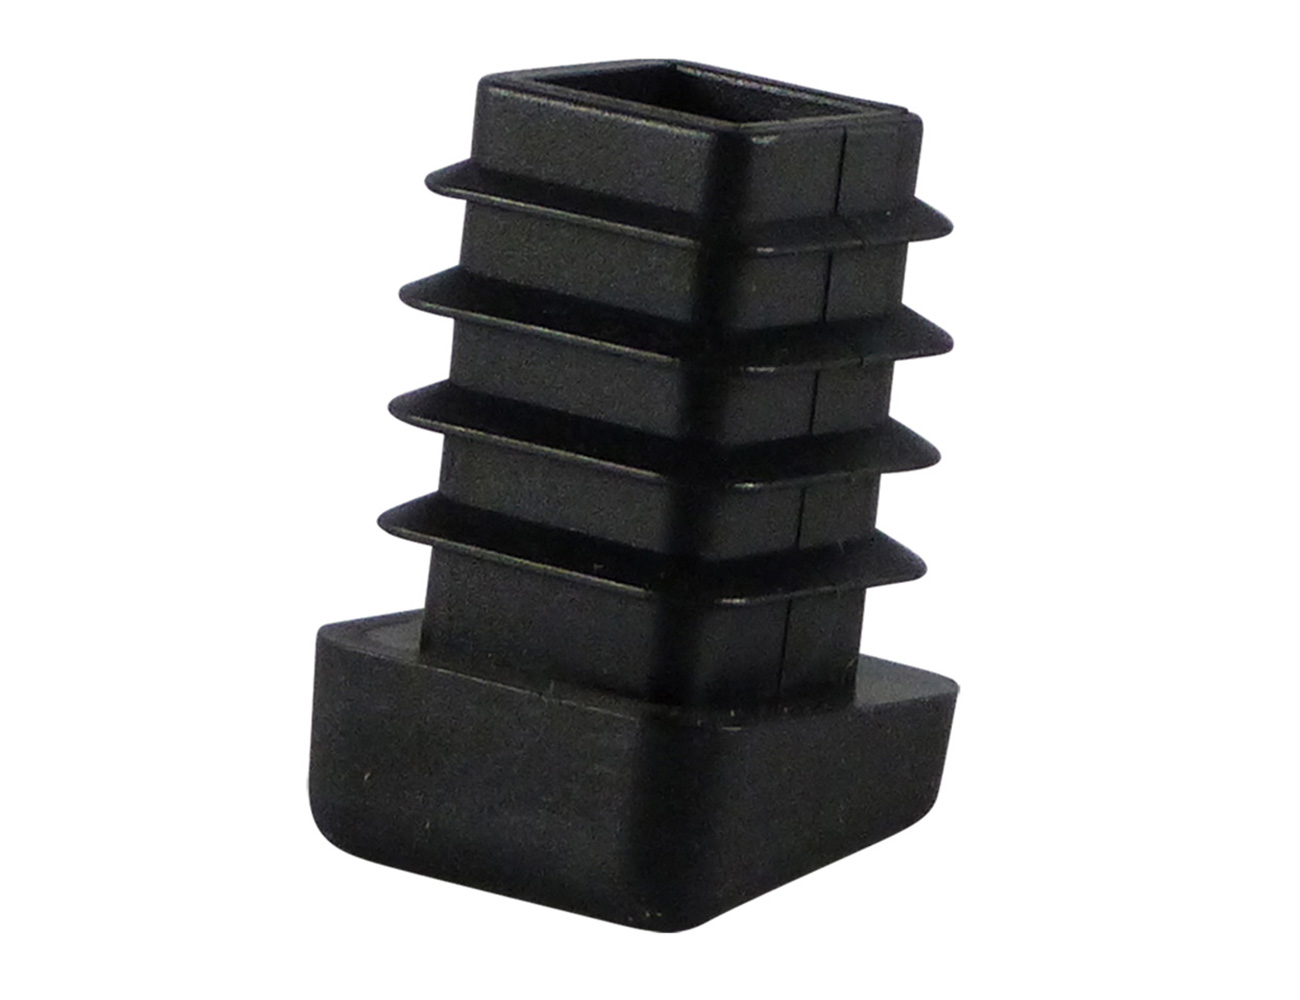 Square end cap inserts - angled base